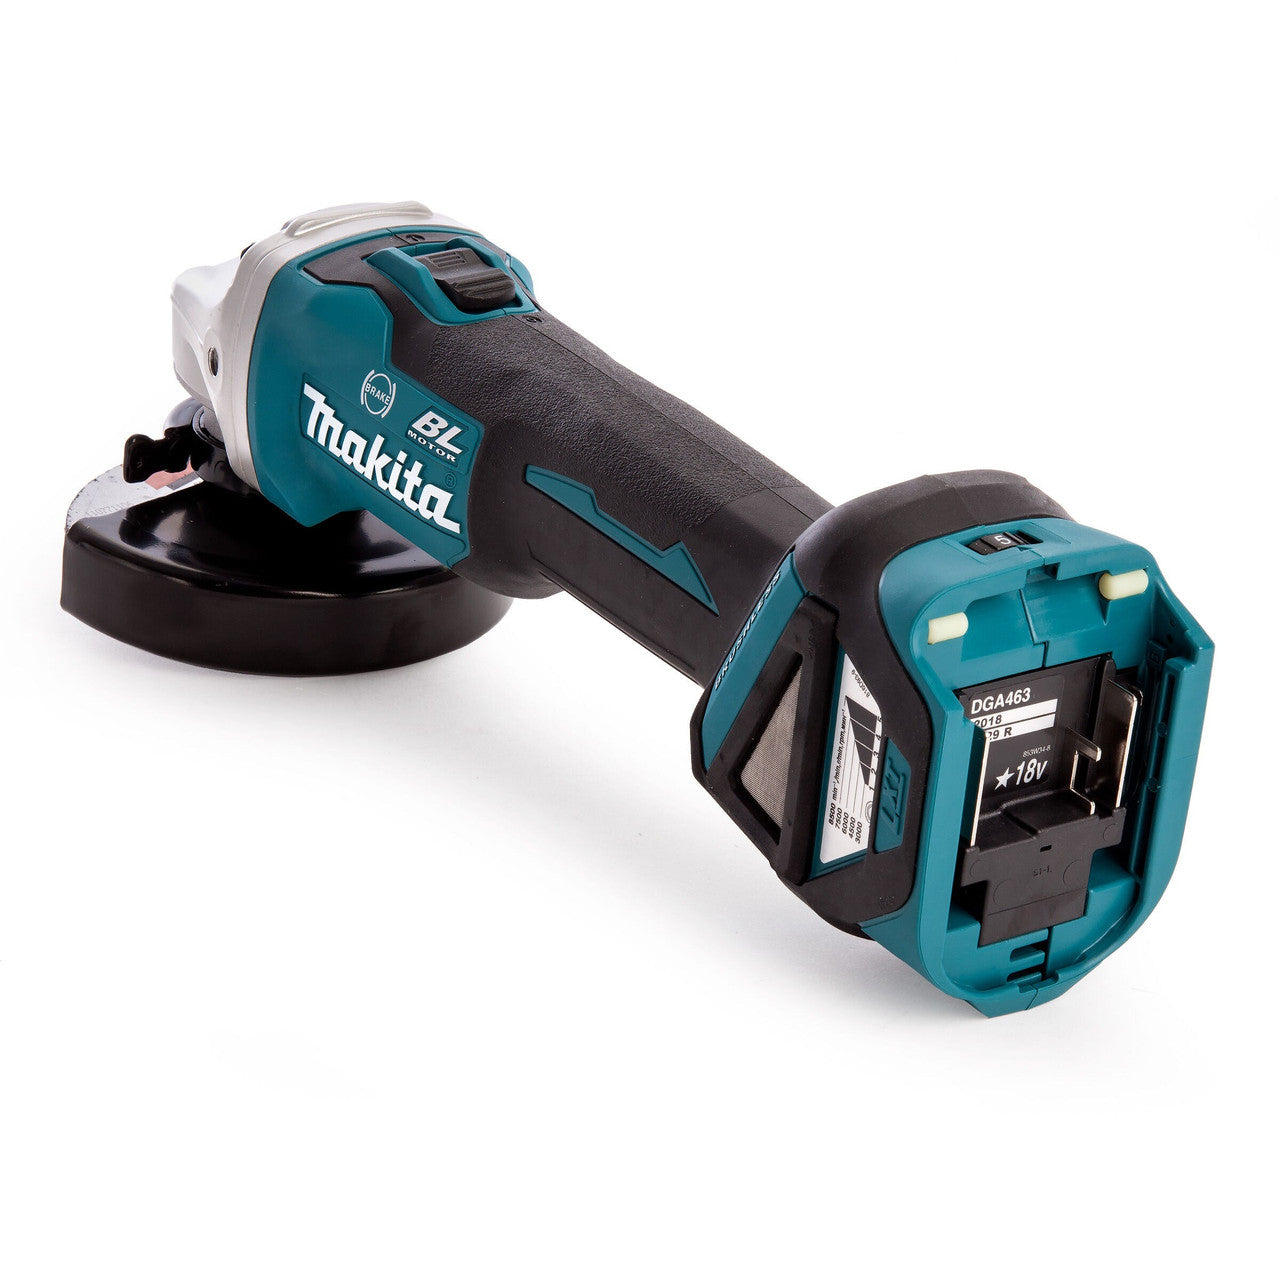 Makita DGA463Z 18V LXT 4.5 inch/115mm Brushless Angle Grinder (Body Only)